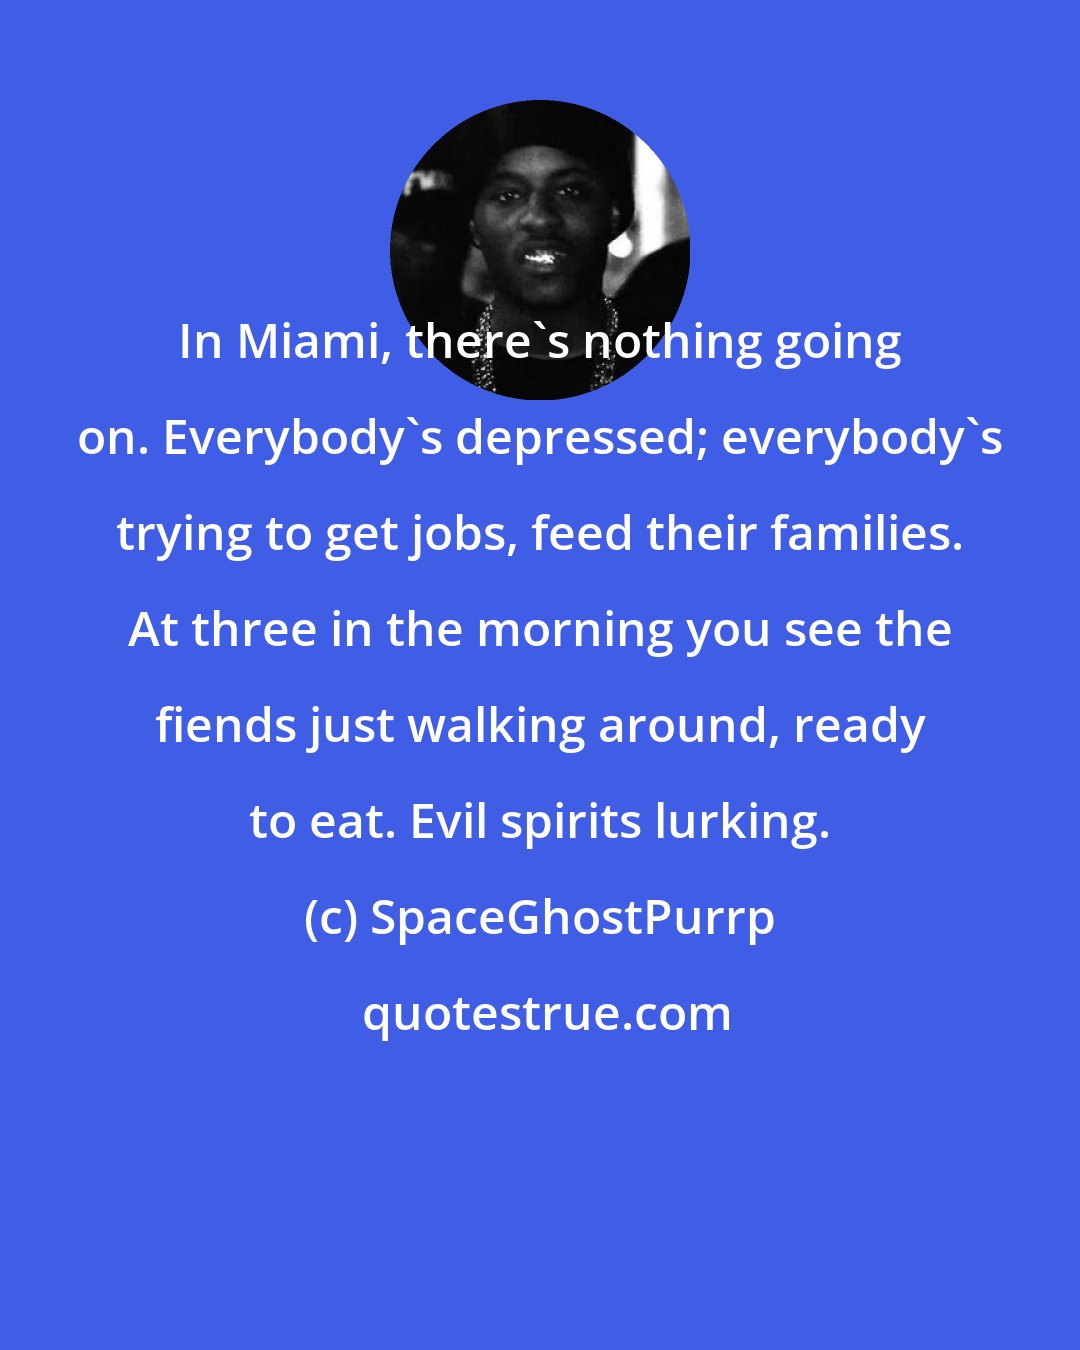 SpaceGhostPurrp: In Miami, there's nothing going on. Everybody's depressed; everybody's trying to get jobs, feed their families. At three in the morning you see the fiends just walking around, ready to eat. Evil spirits lurking.